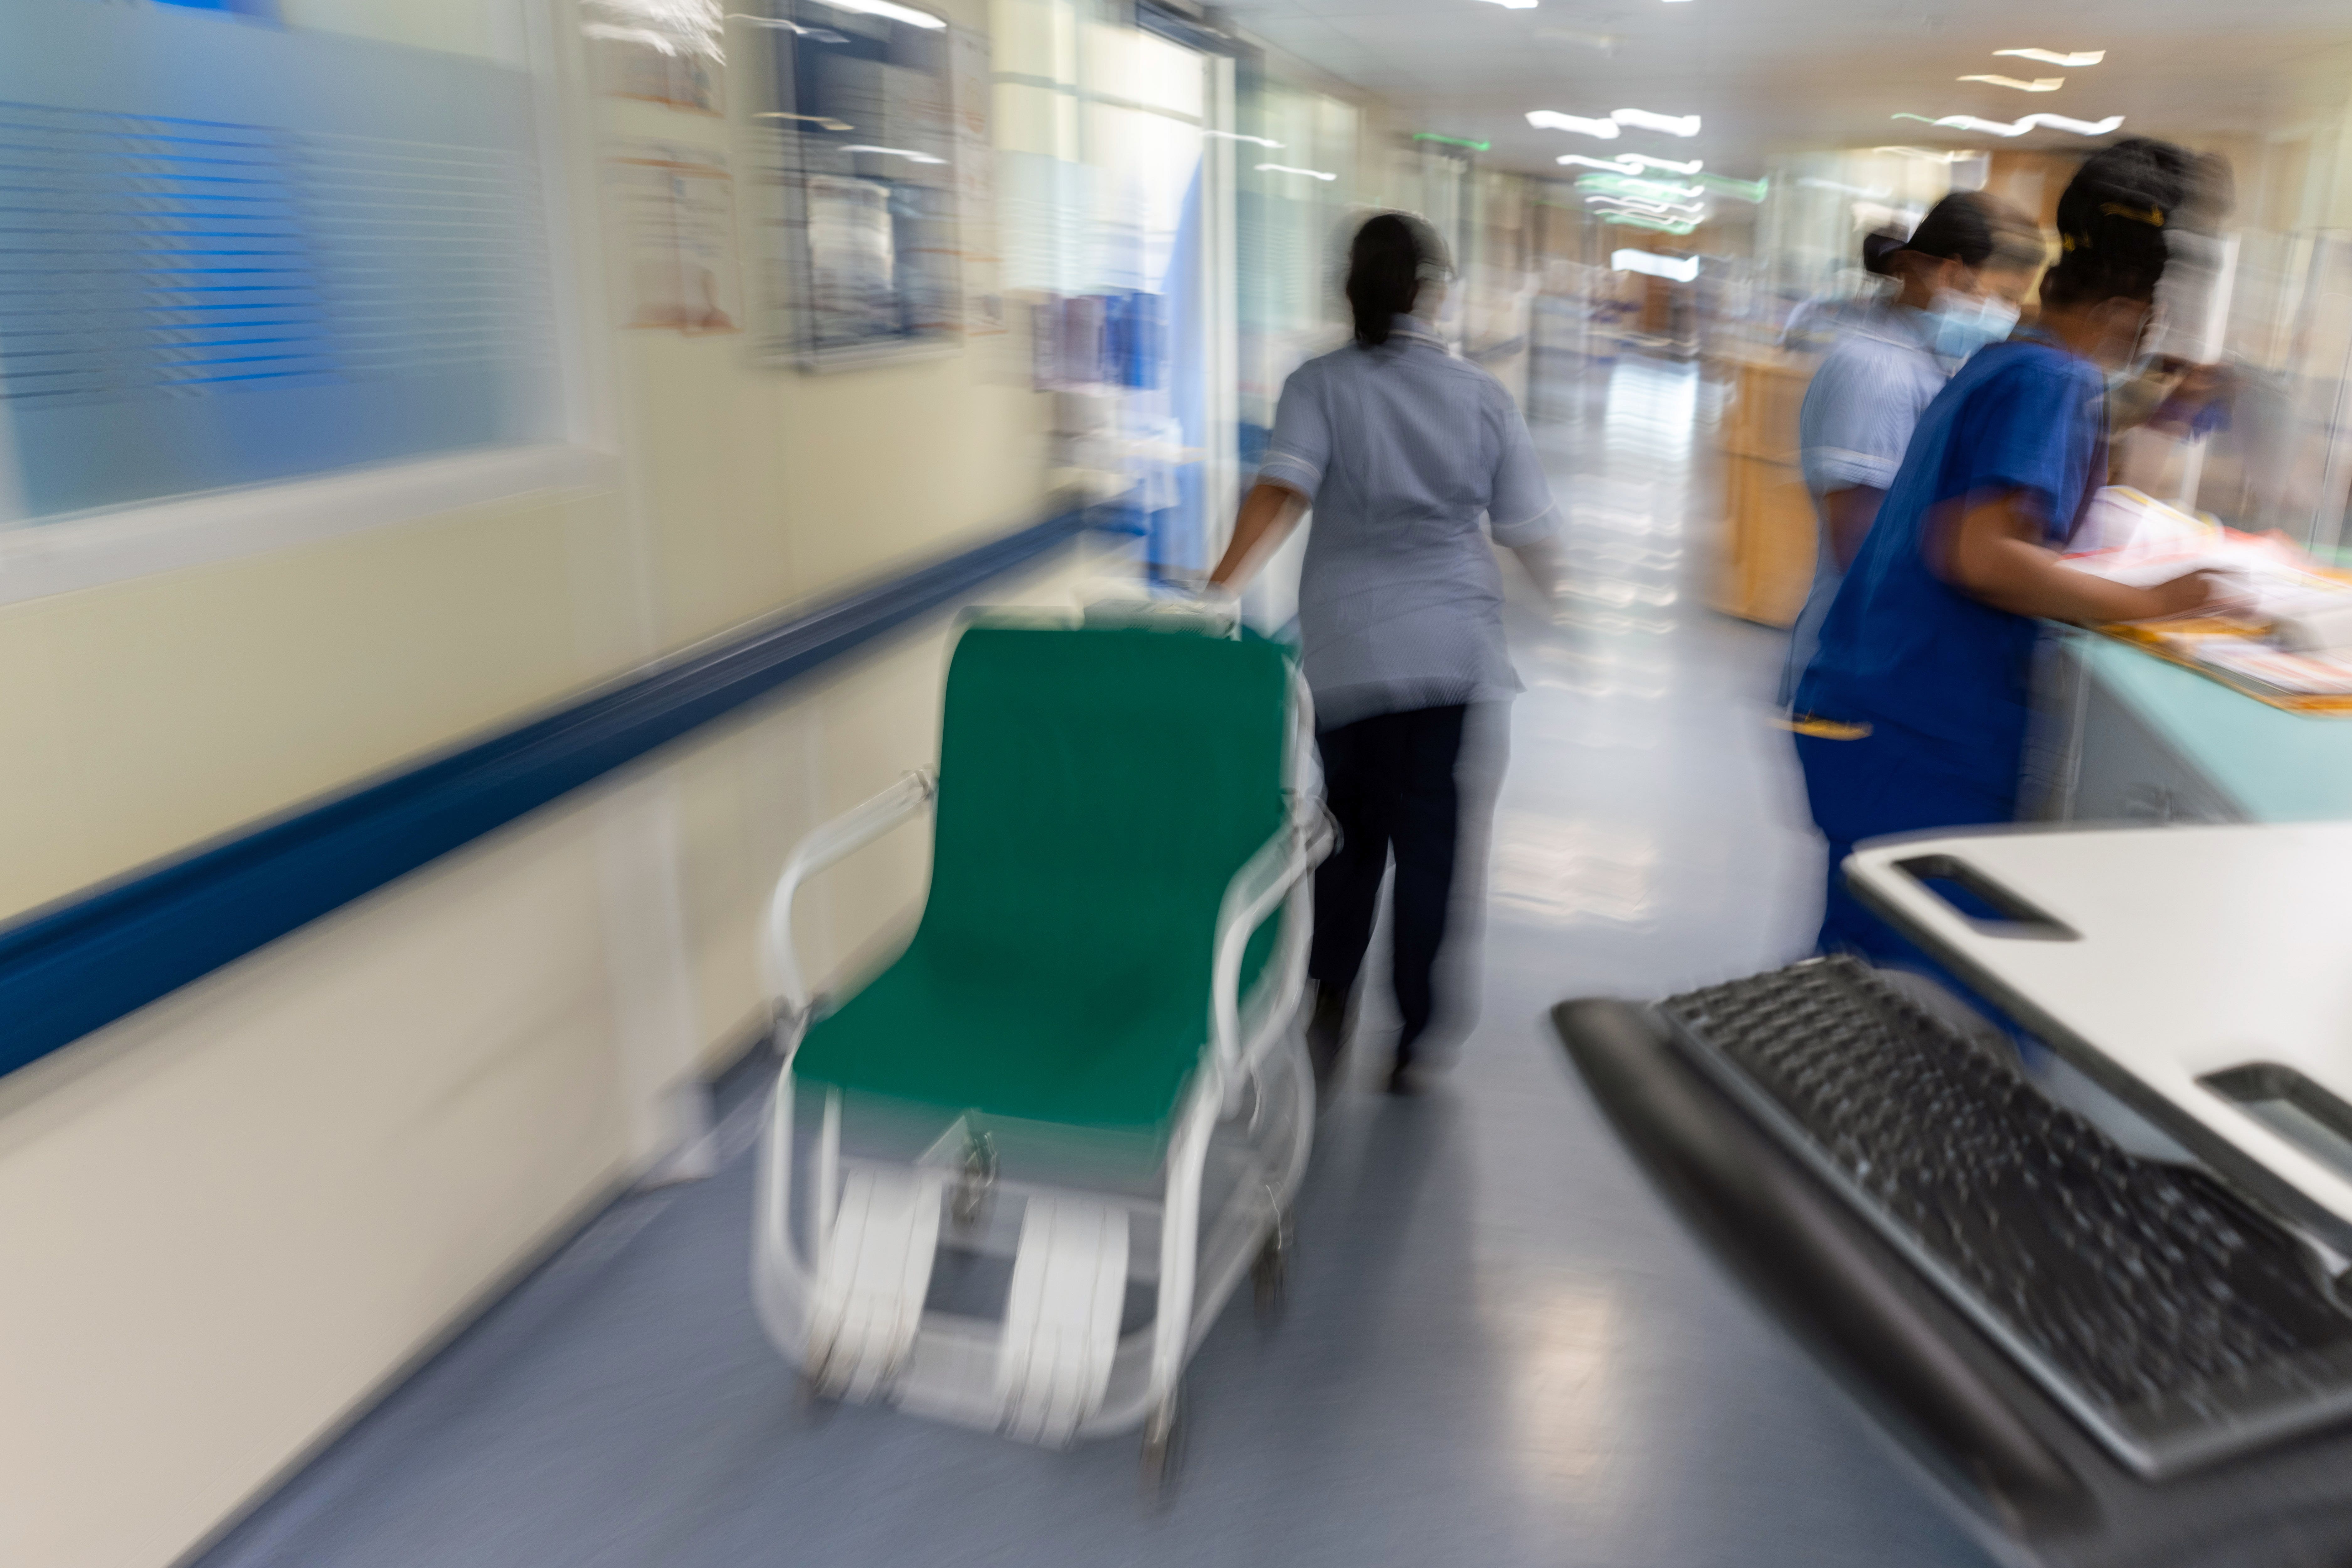 The NHS is attempting to reduce the number of avoidable hospital admissions this winter by using technology (PA)